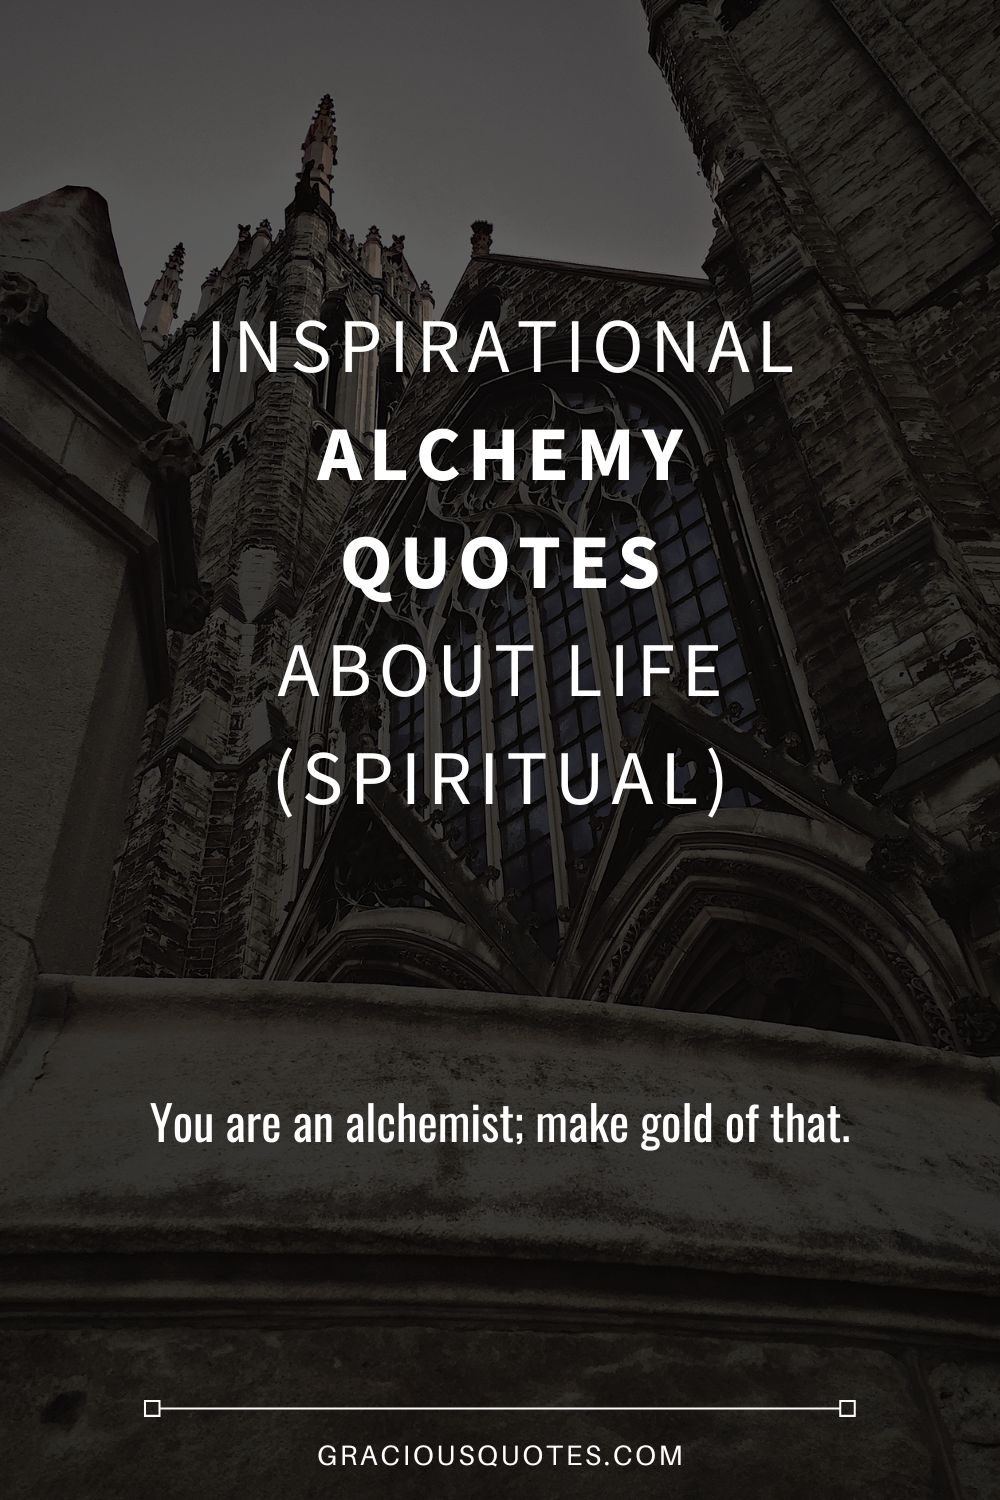 Inspirational Alchemy Quotes About Life (SPIRITUAL) - Gracious Quotes